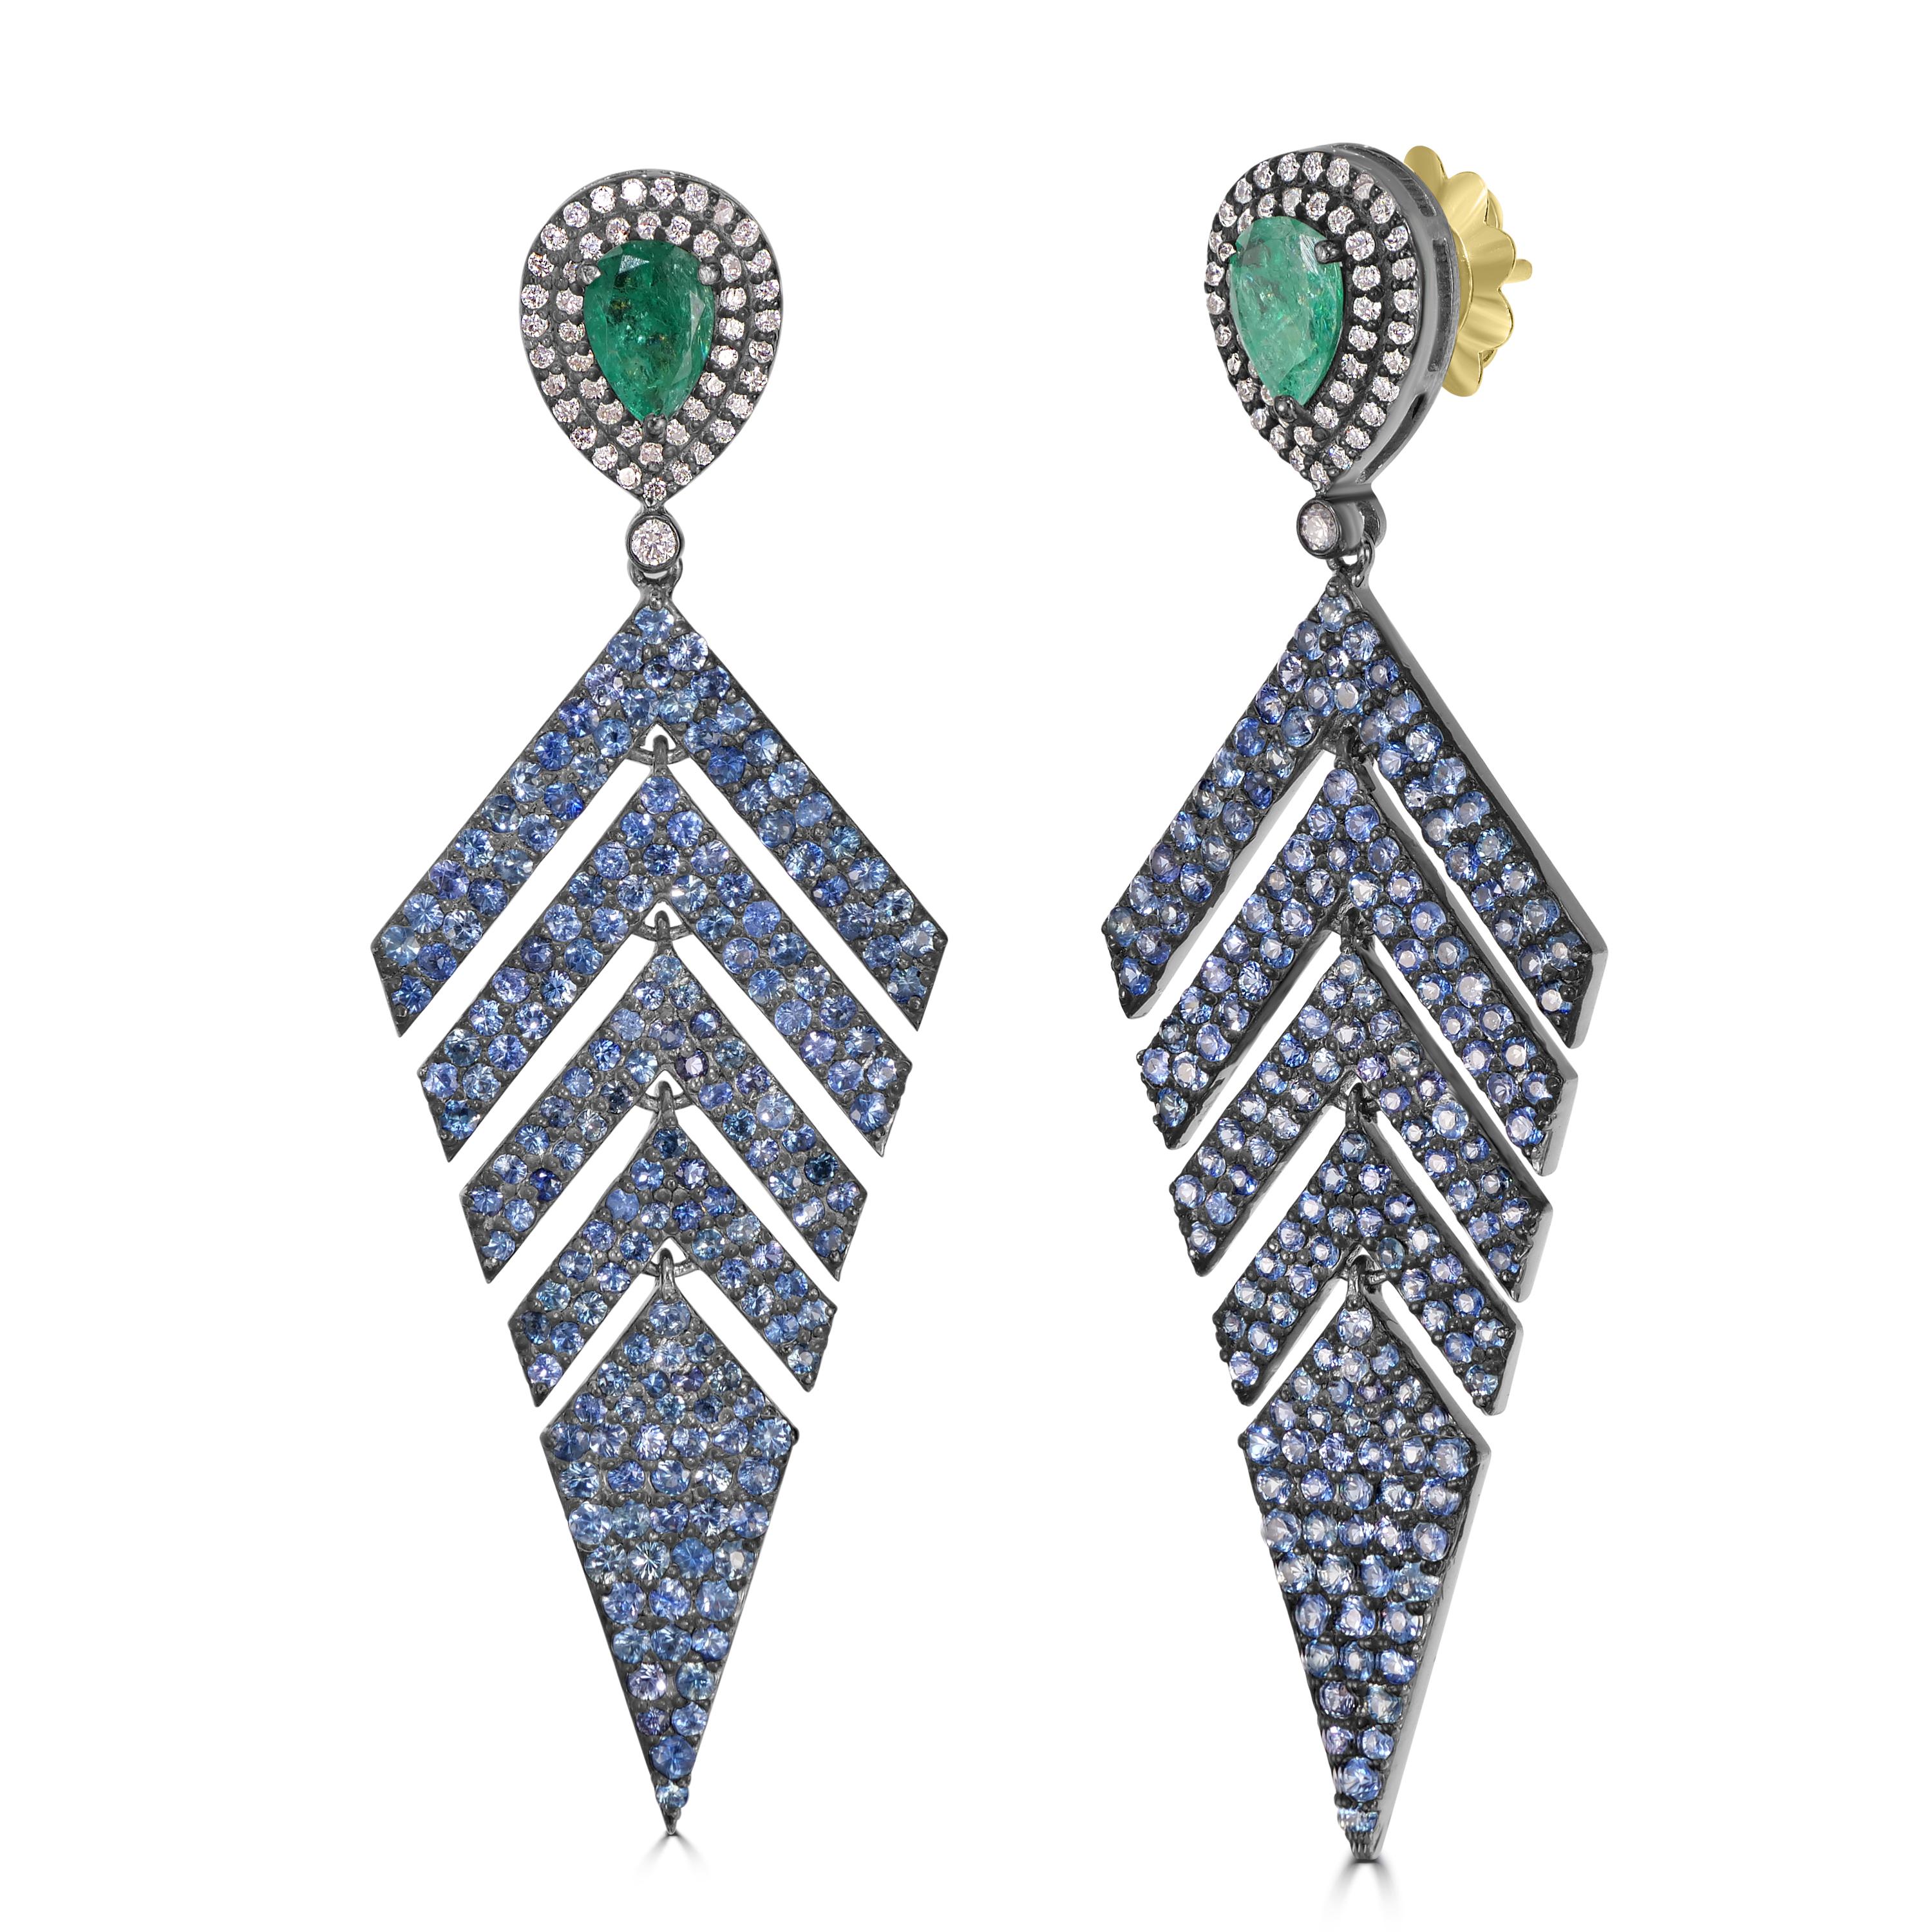 Embark on a journey through nature's beauty with our Victorian 6.43 Cttw. Emerald, Sapphire, and Diamond Fern Leaf Dangle Earrings. A testament to exquisite craftsmanship and inspired design, these earrings encapsulate the allure of a fern leaf in a